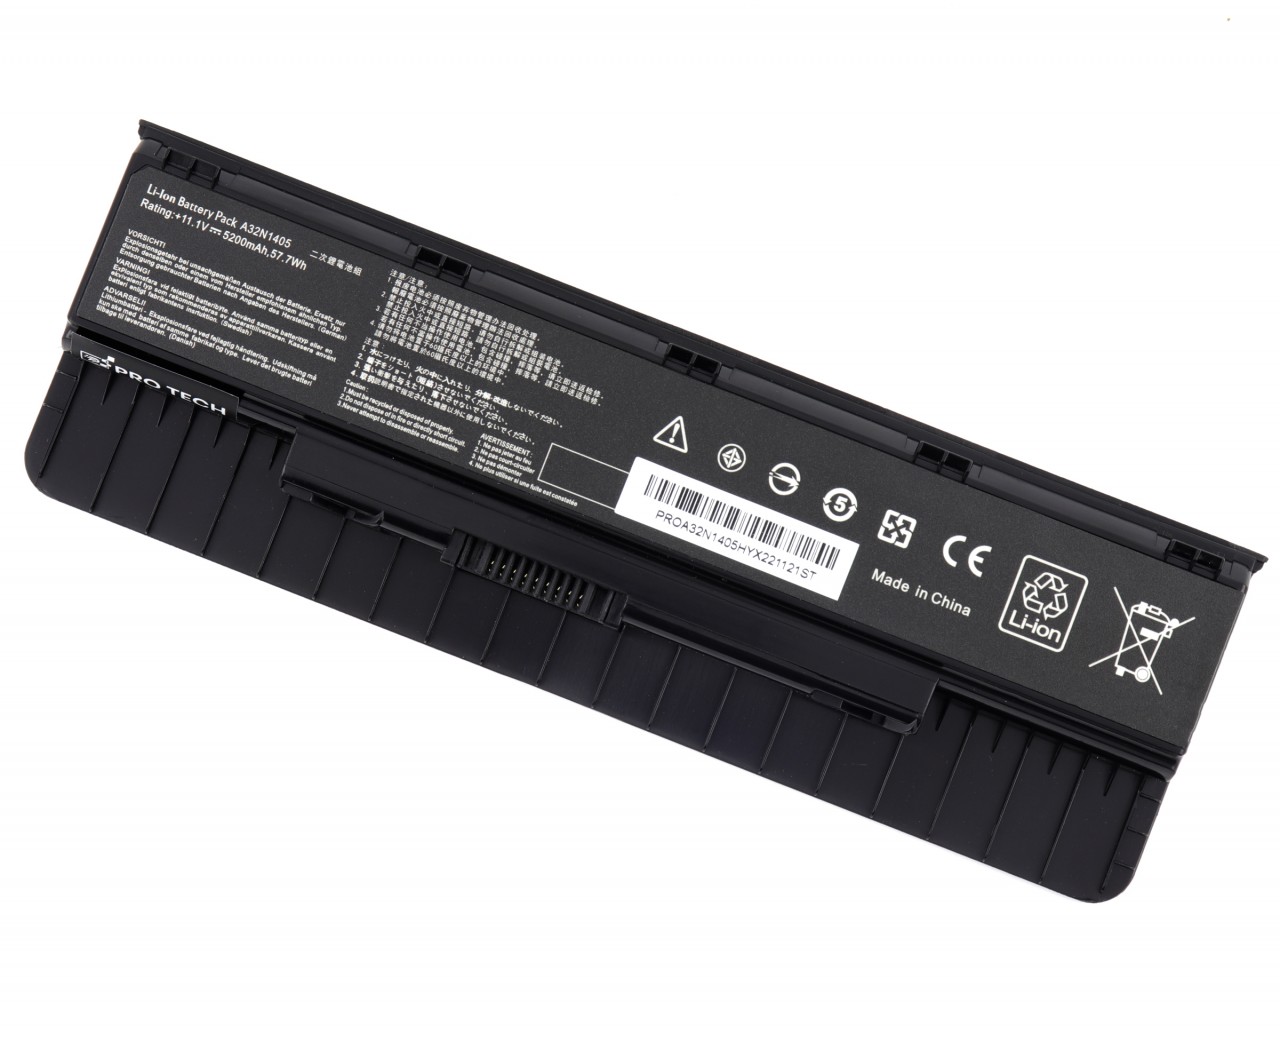 Baterie Asus N551JM 57.7Wh / 5200mAh Protech High Quality Replacement